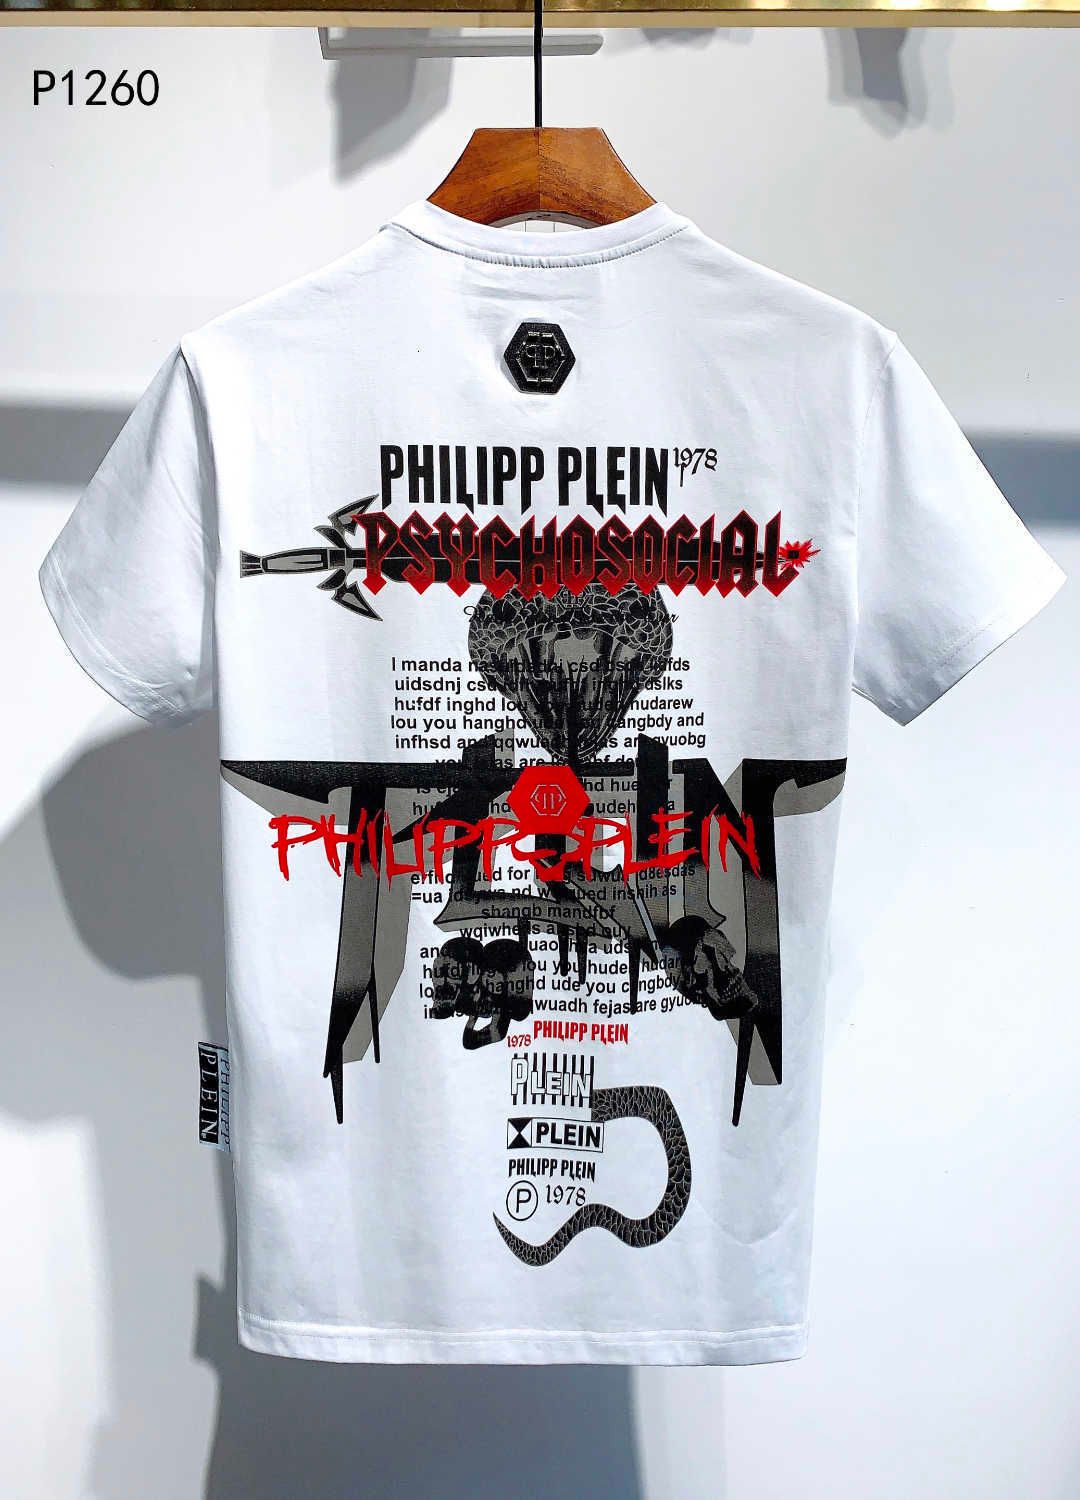 Hip Hop Newest Fashion Men And Women T Shirts Pure Cotton Short Sleeves T Shirt Size M 3xl Hot Selling And Personality Printing Tshits Tee S From Leegucci 23 96 Dhgate Com